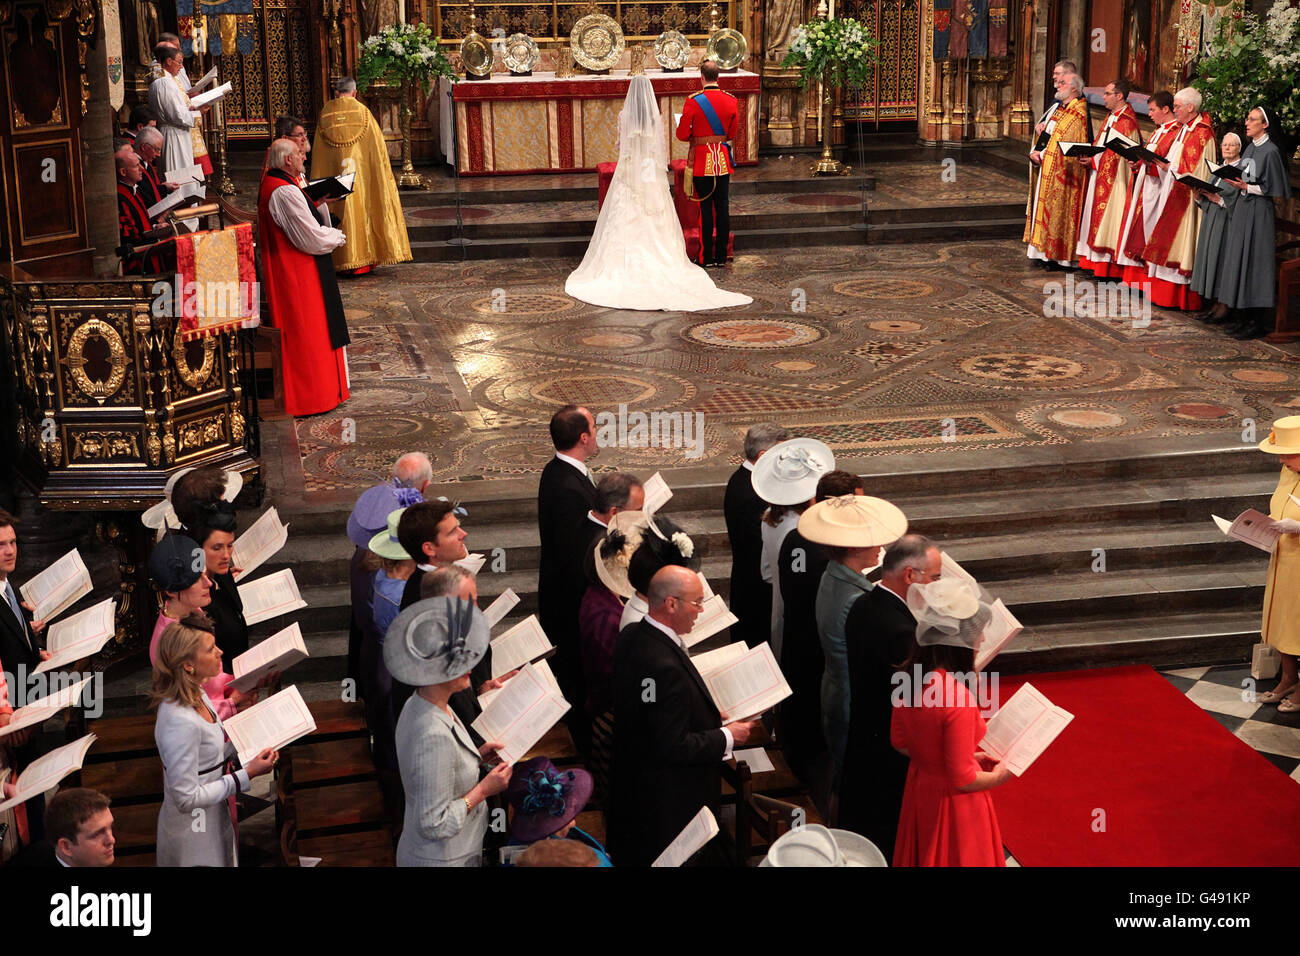 Prince William and and his new bride Kate at the altar of Westminster Abbey, London, during their wedding service. Stock Photo